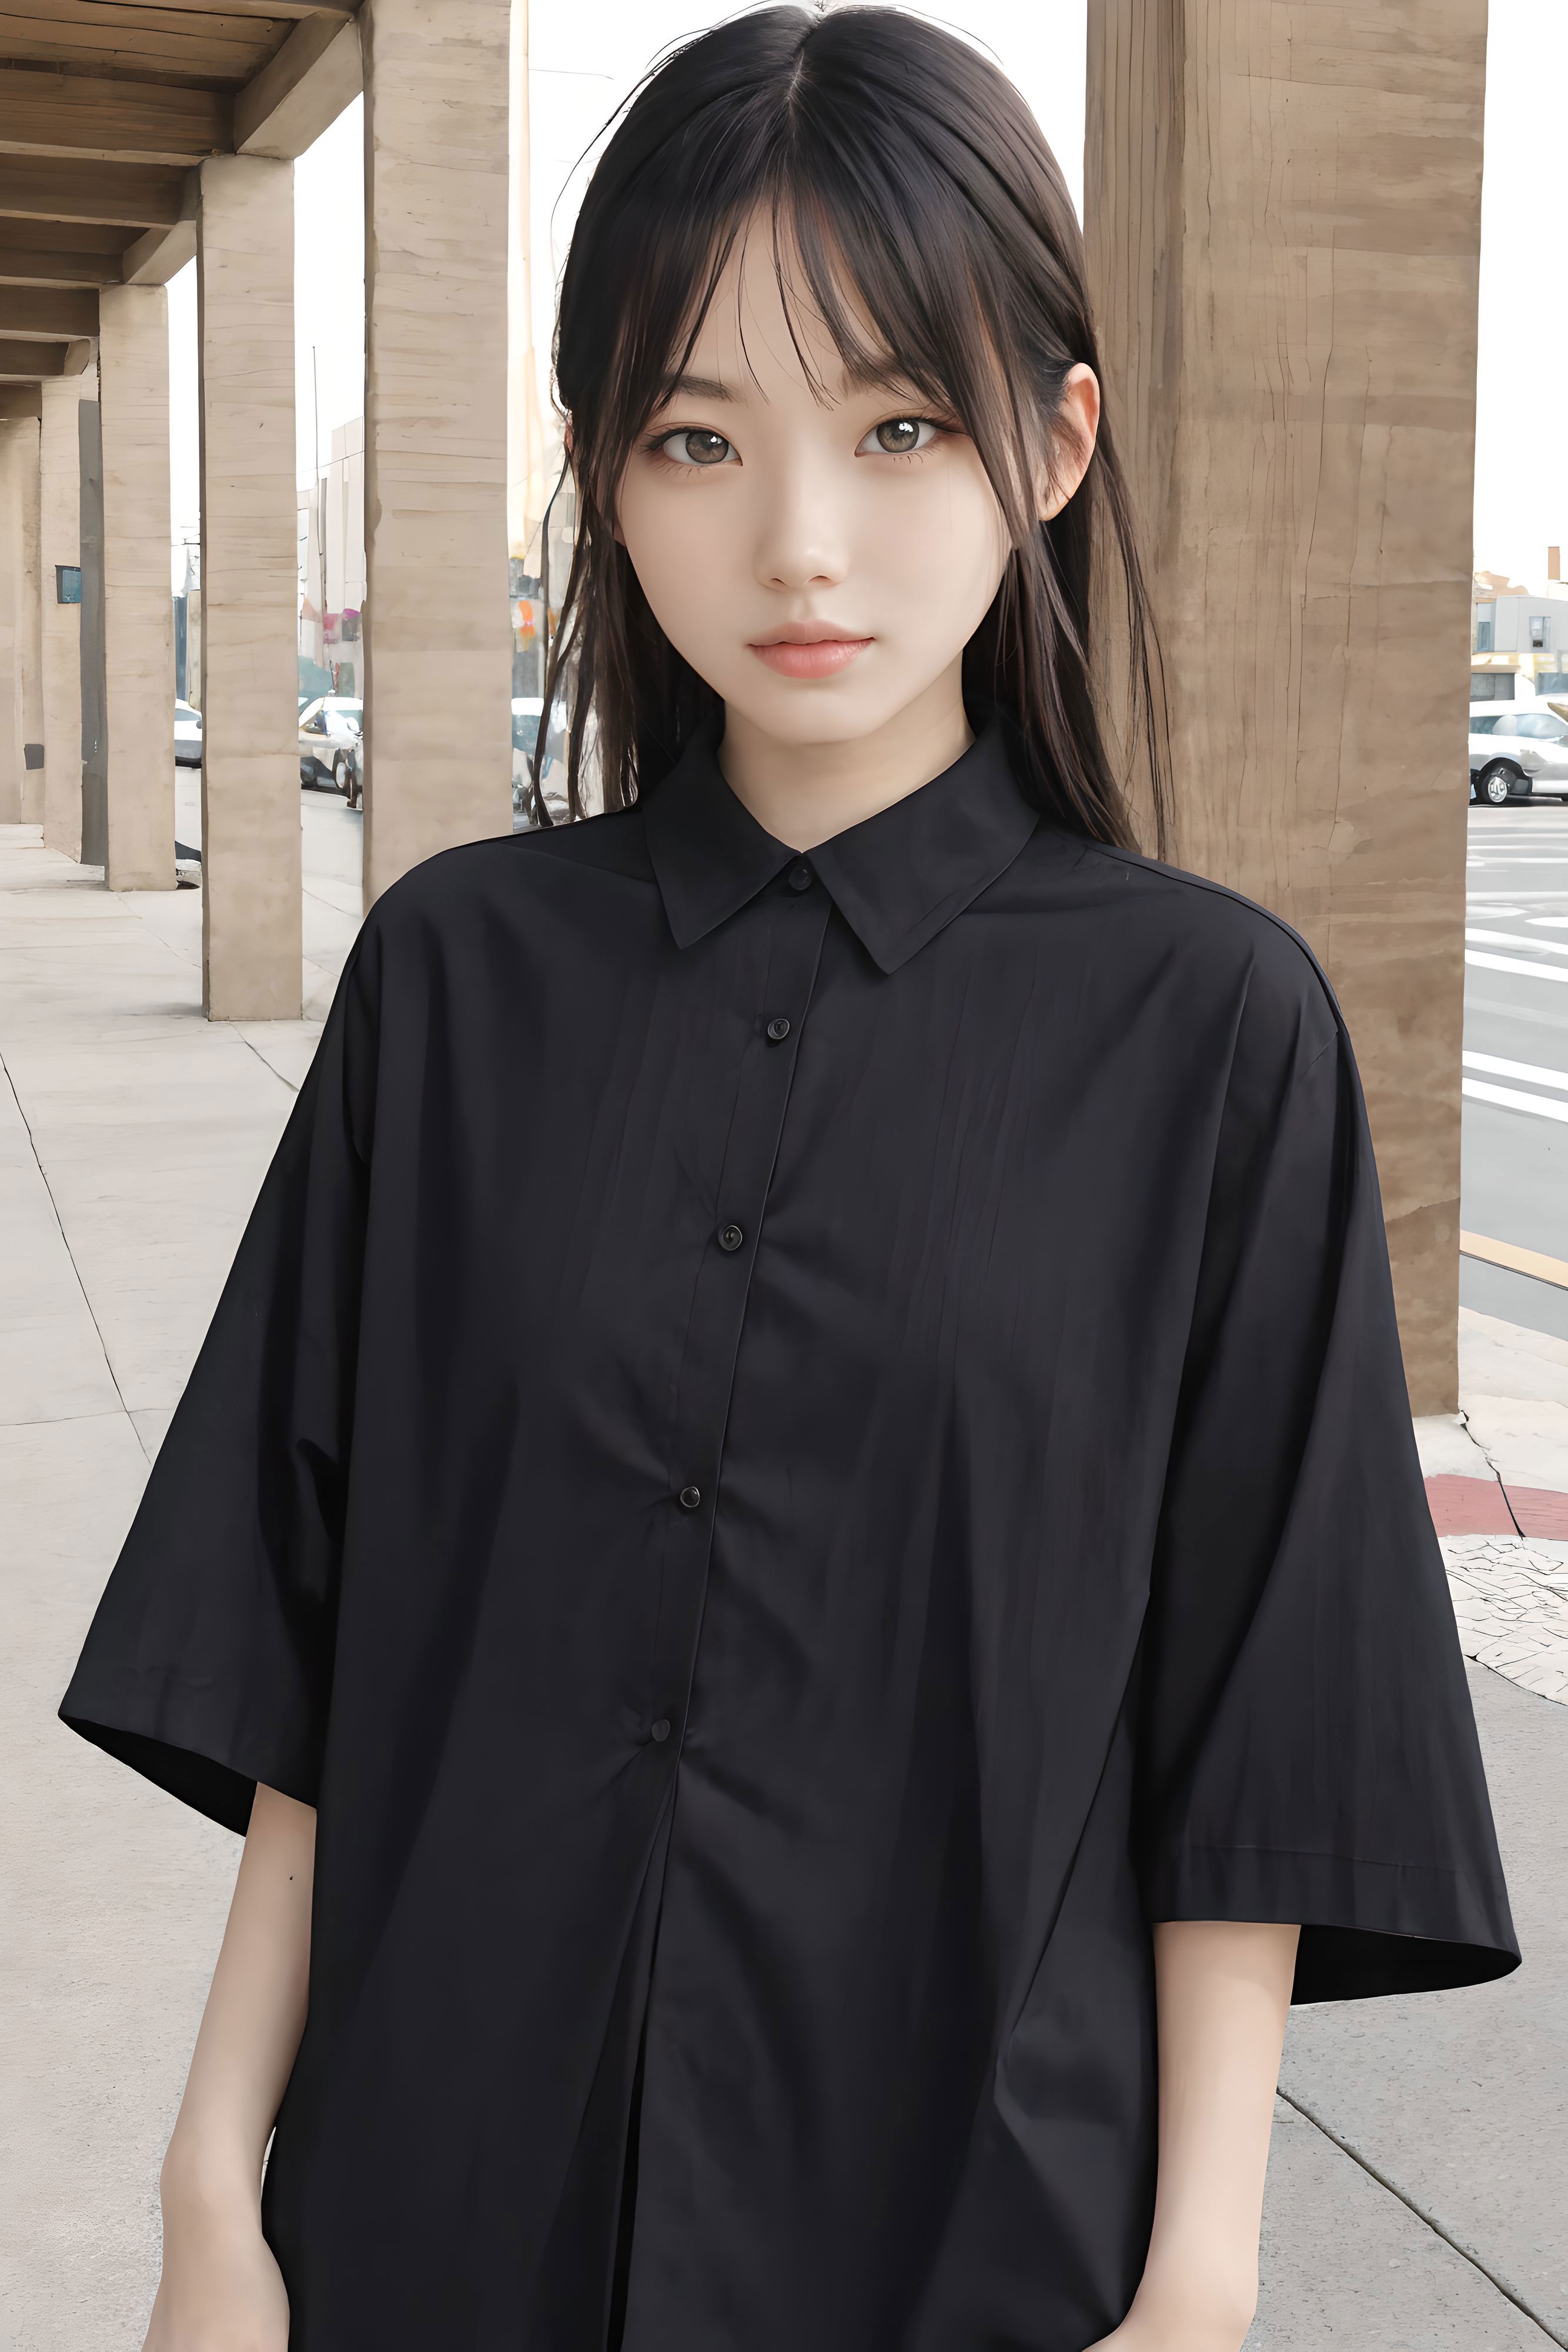 PAseer Clothes Package-Abbreviated Style Clothes-简约衫 image by Aseer